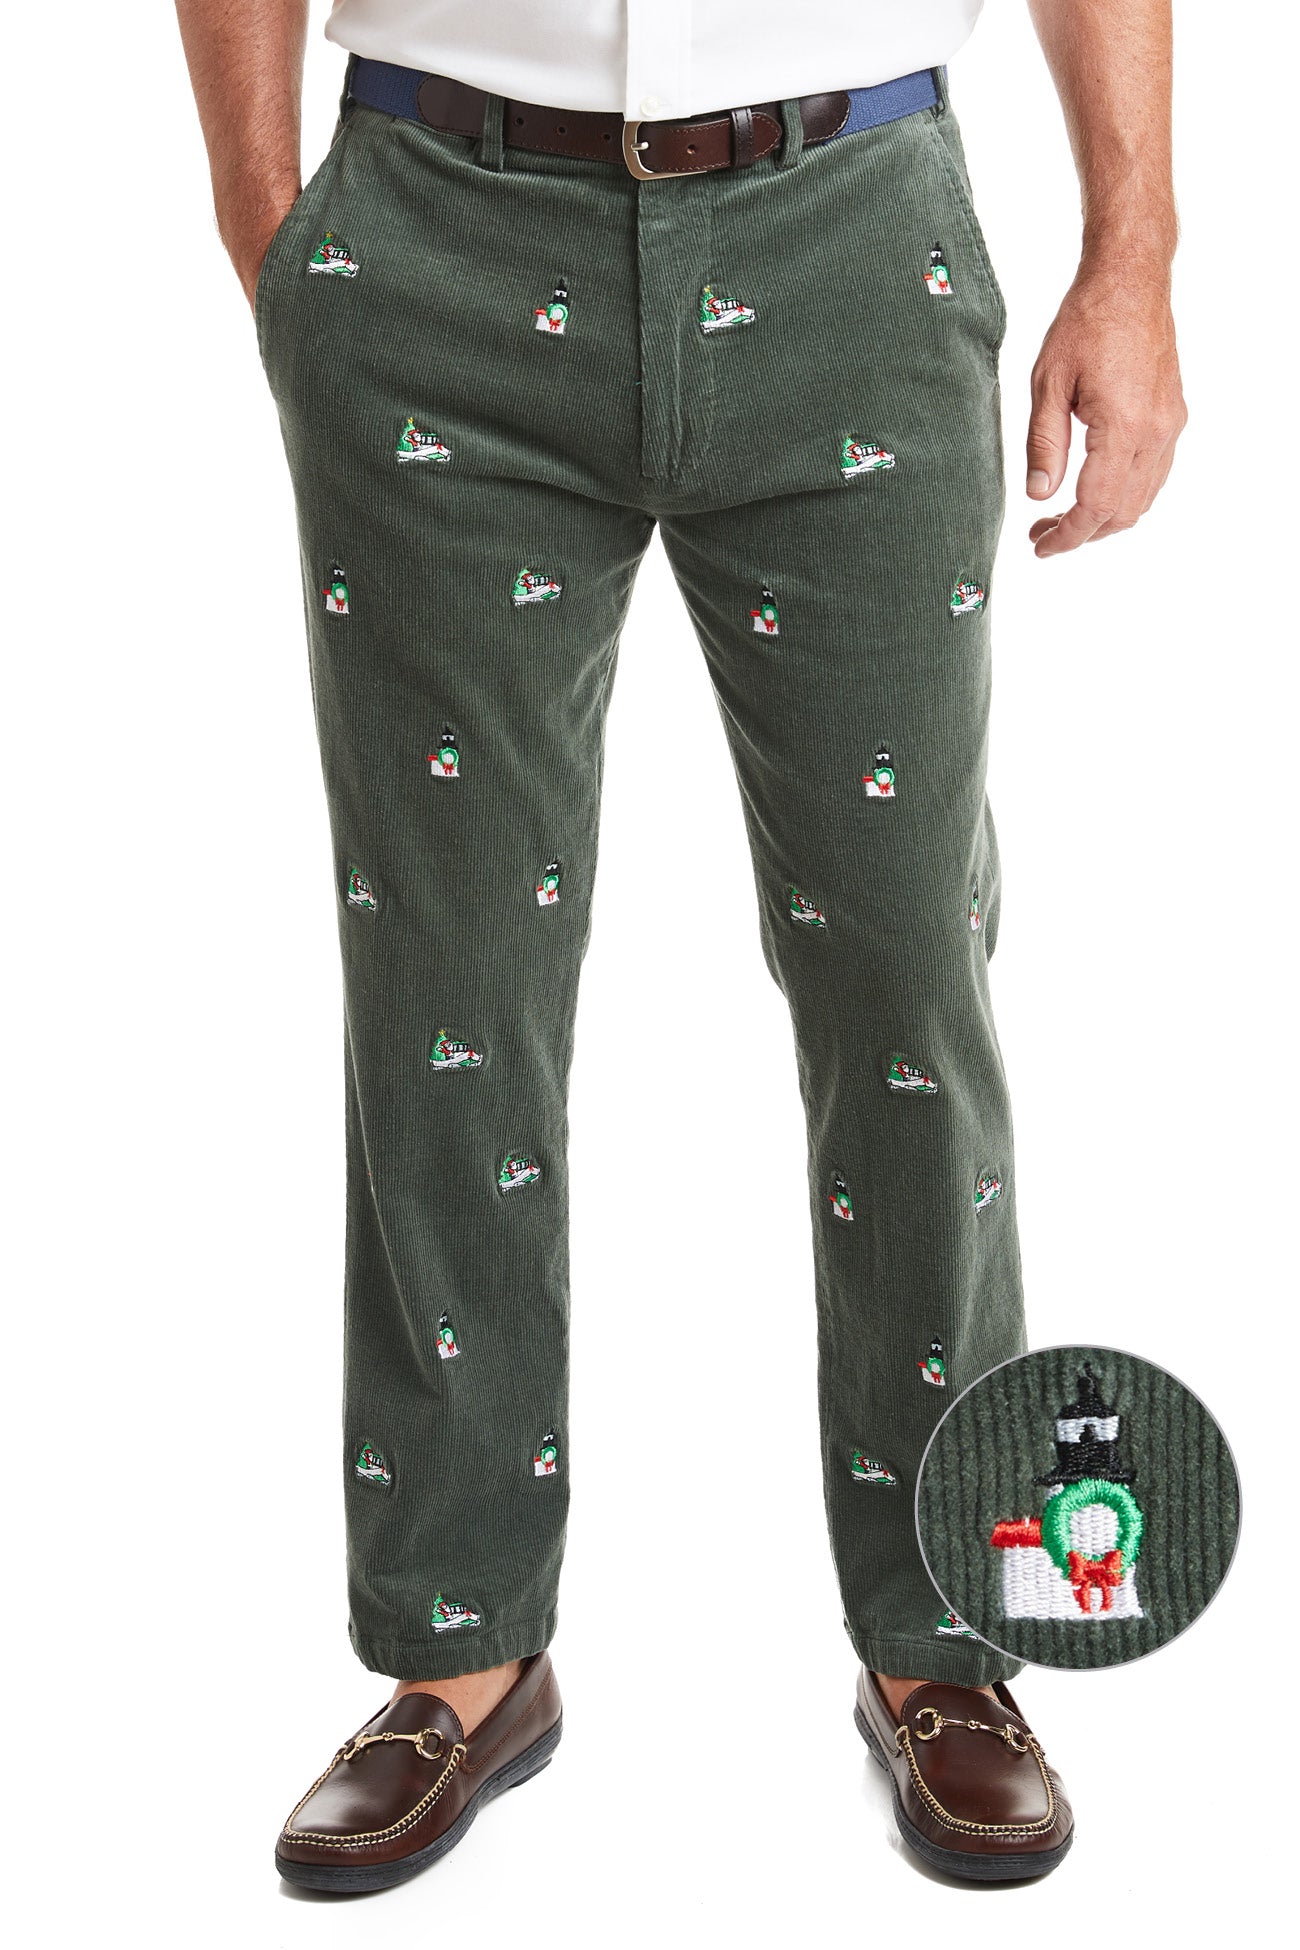 Beachcomber Corduroy Pant Olive with Santa Boat and Lighthouse MENS EMBROIDERED PANTS Castaway Nantucket Island